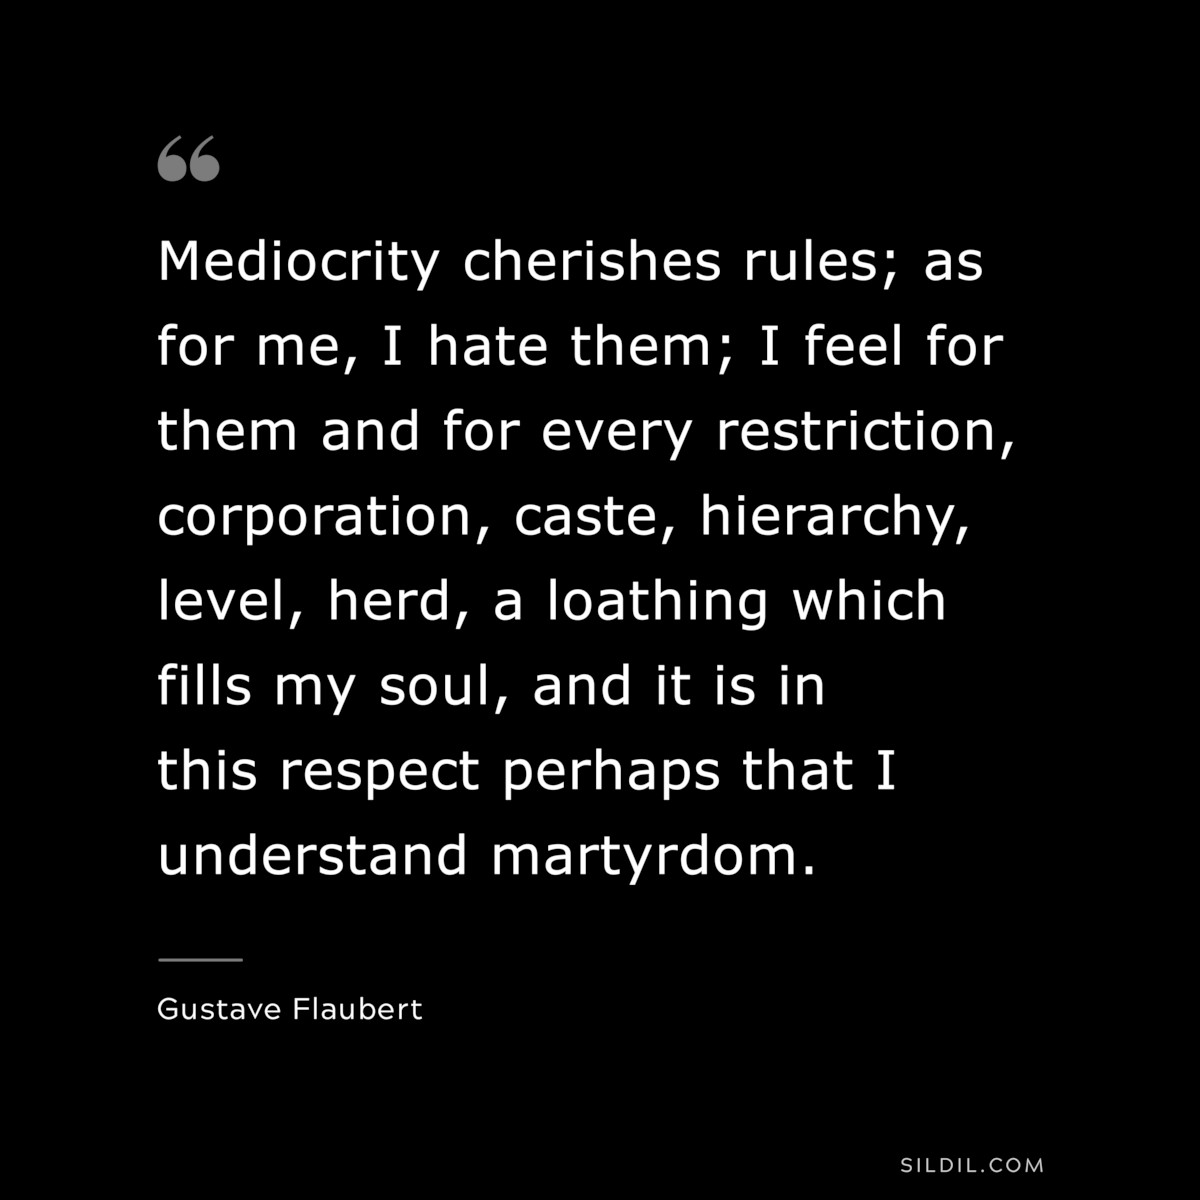 Mediocrity cherishes rules; as for me, I hate them; I feel for them and for every restriction, corporation, caste, hierarchy, level, herd, a loathing which fills my soul, and it is in this respect perhaps that I understand martyrdom. ― Gustave Flaubert